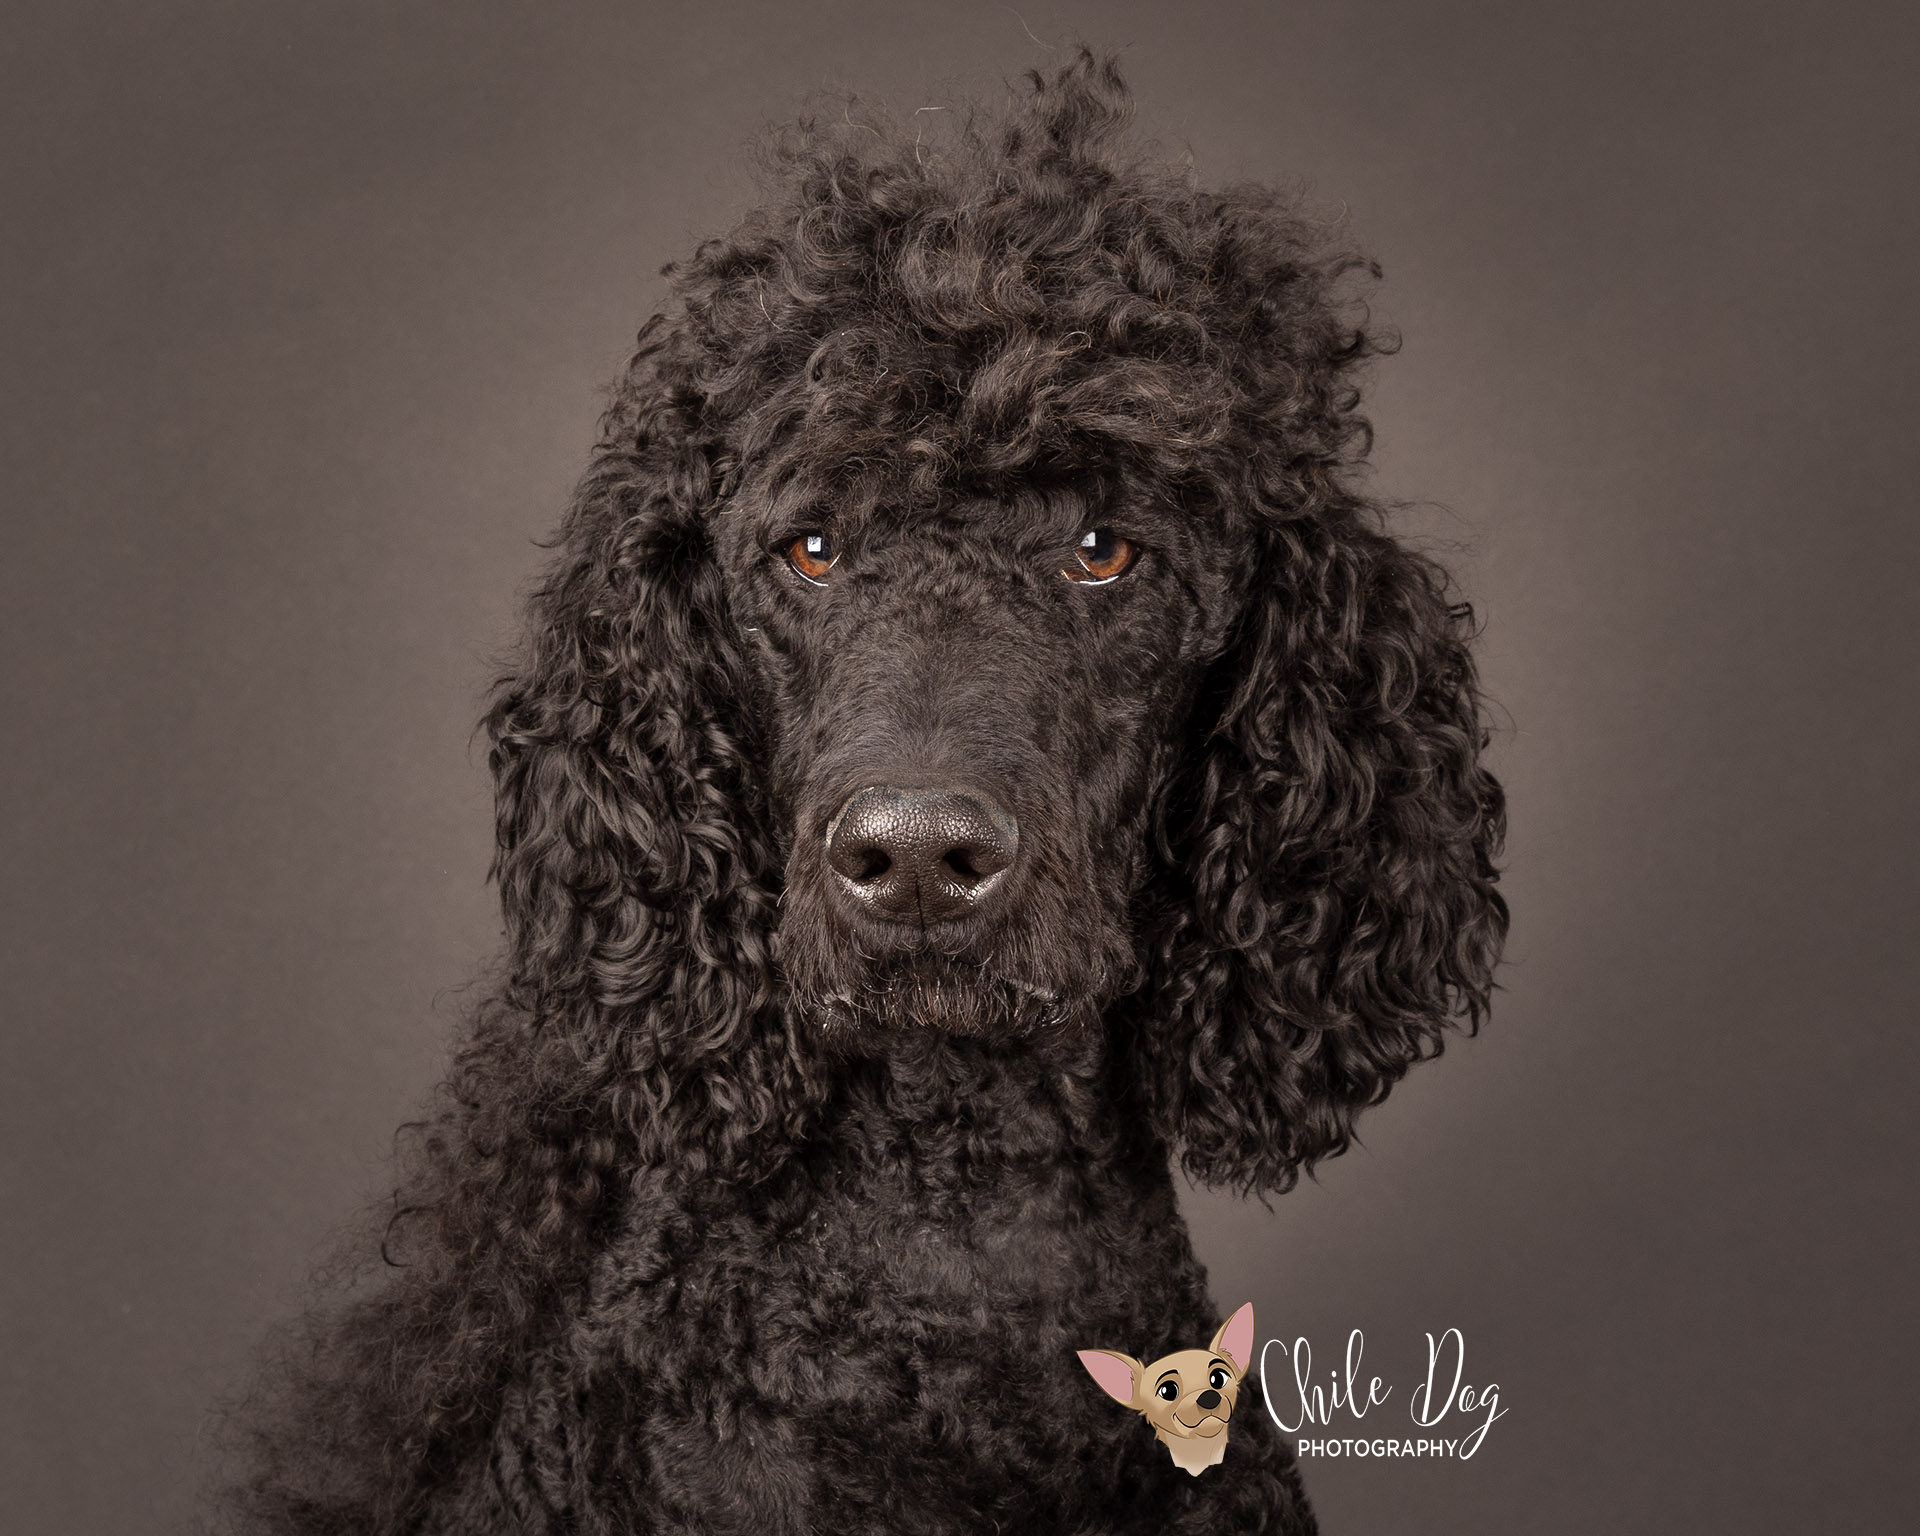 A Black Standard Poodle that possibly has Addison's Disease